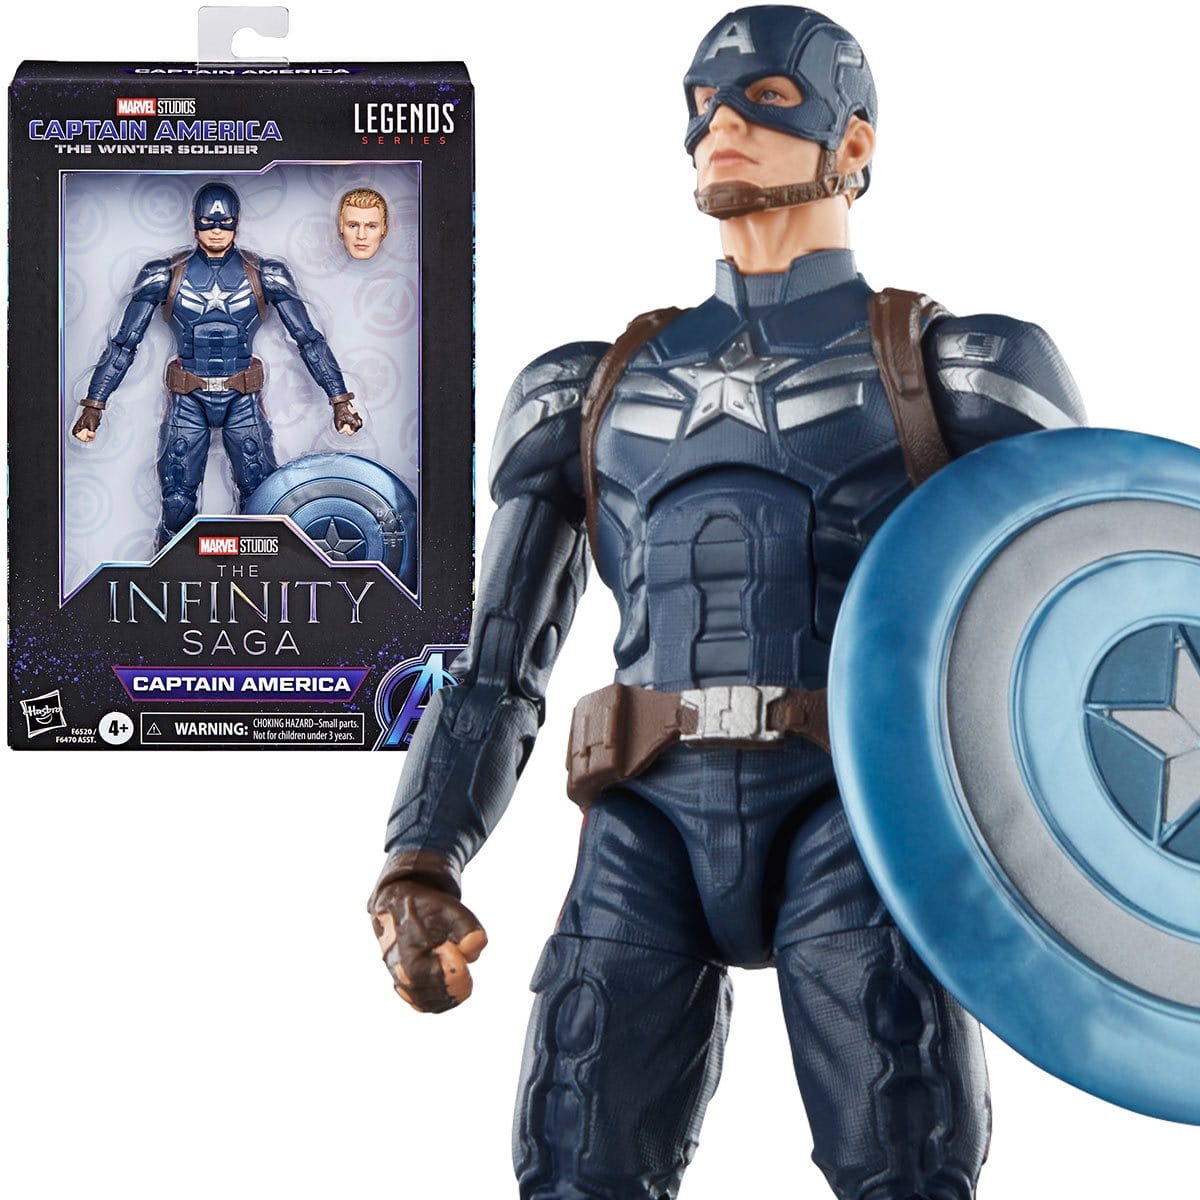 The Winter Soldier Marvel Legends Captain America 6-Inch Action Figure